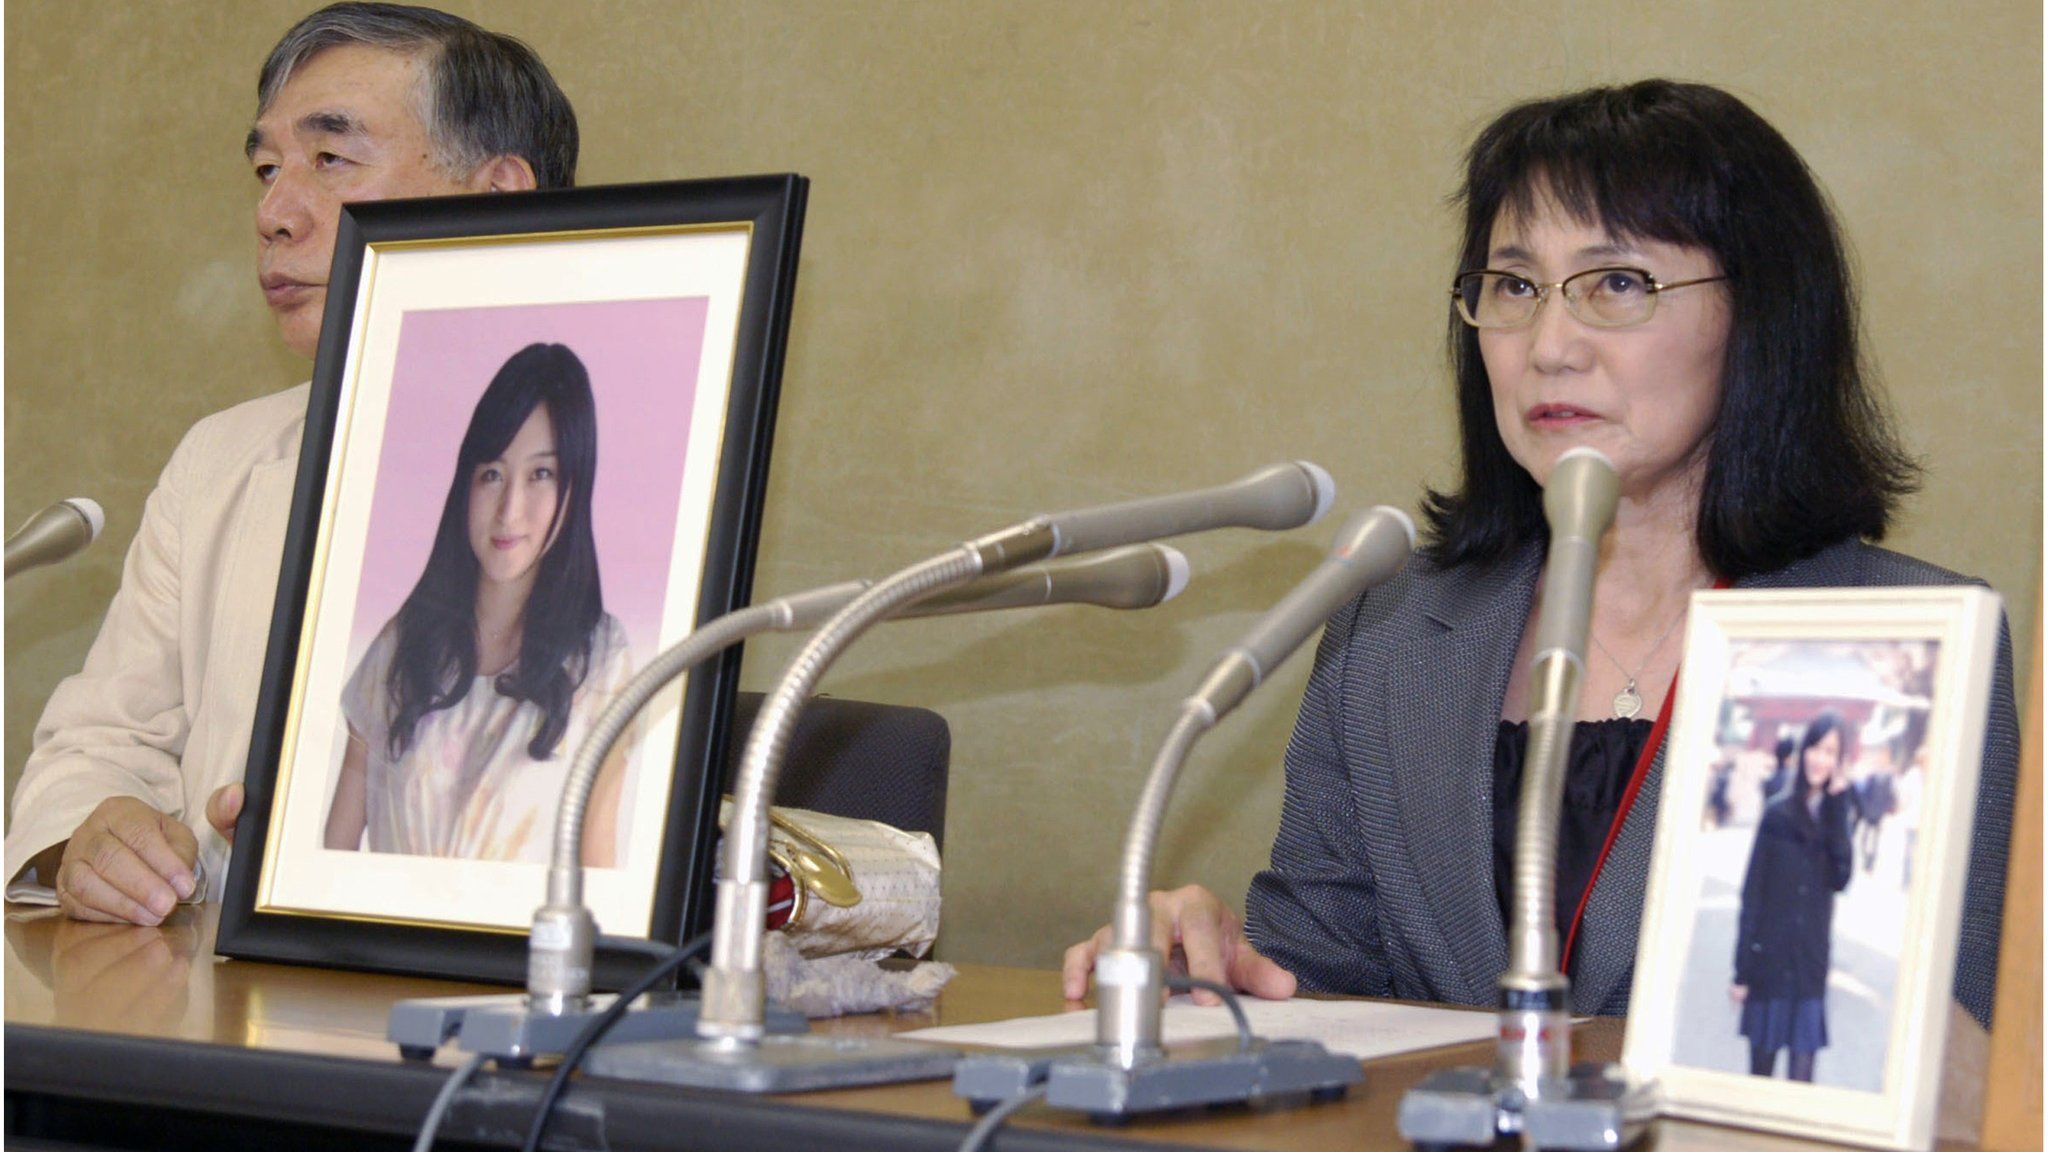 Yukimi Takahashi, right, mother of Matsuri, the employee who killed herself, with lawyer Hiroshi Kawahito and photographs of her daughter, at a news conference in Tokyo on 7 October 2016.